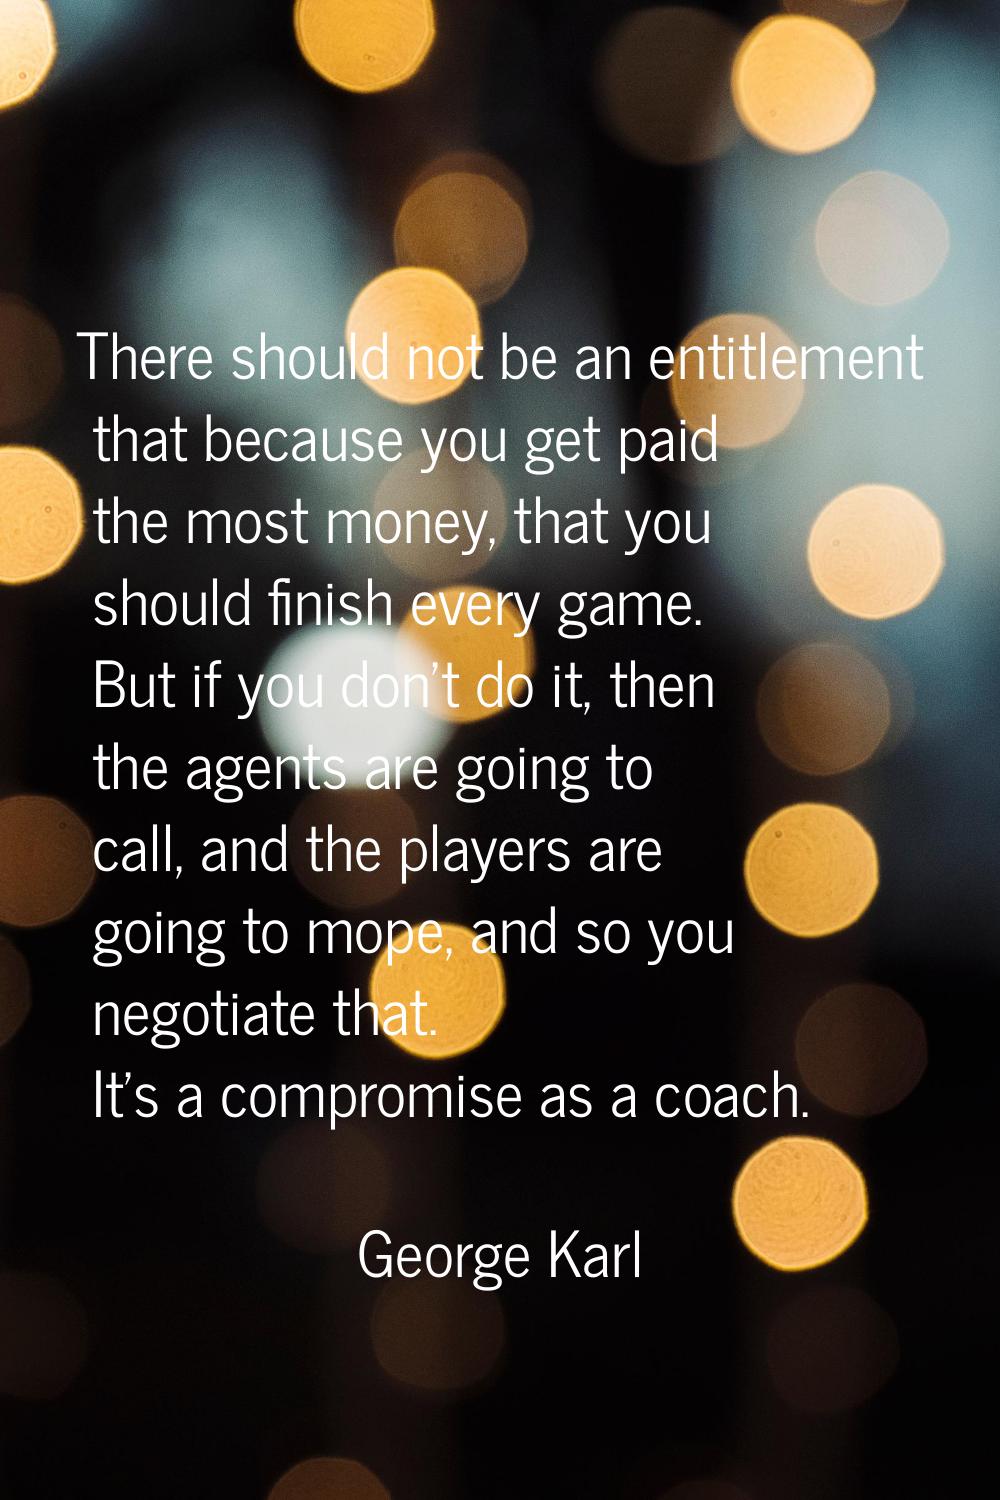 There should not be an entitlement that because you get paid the most money, that you should finish